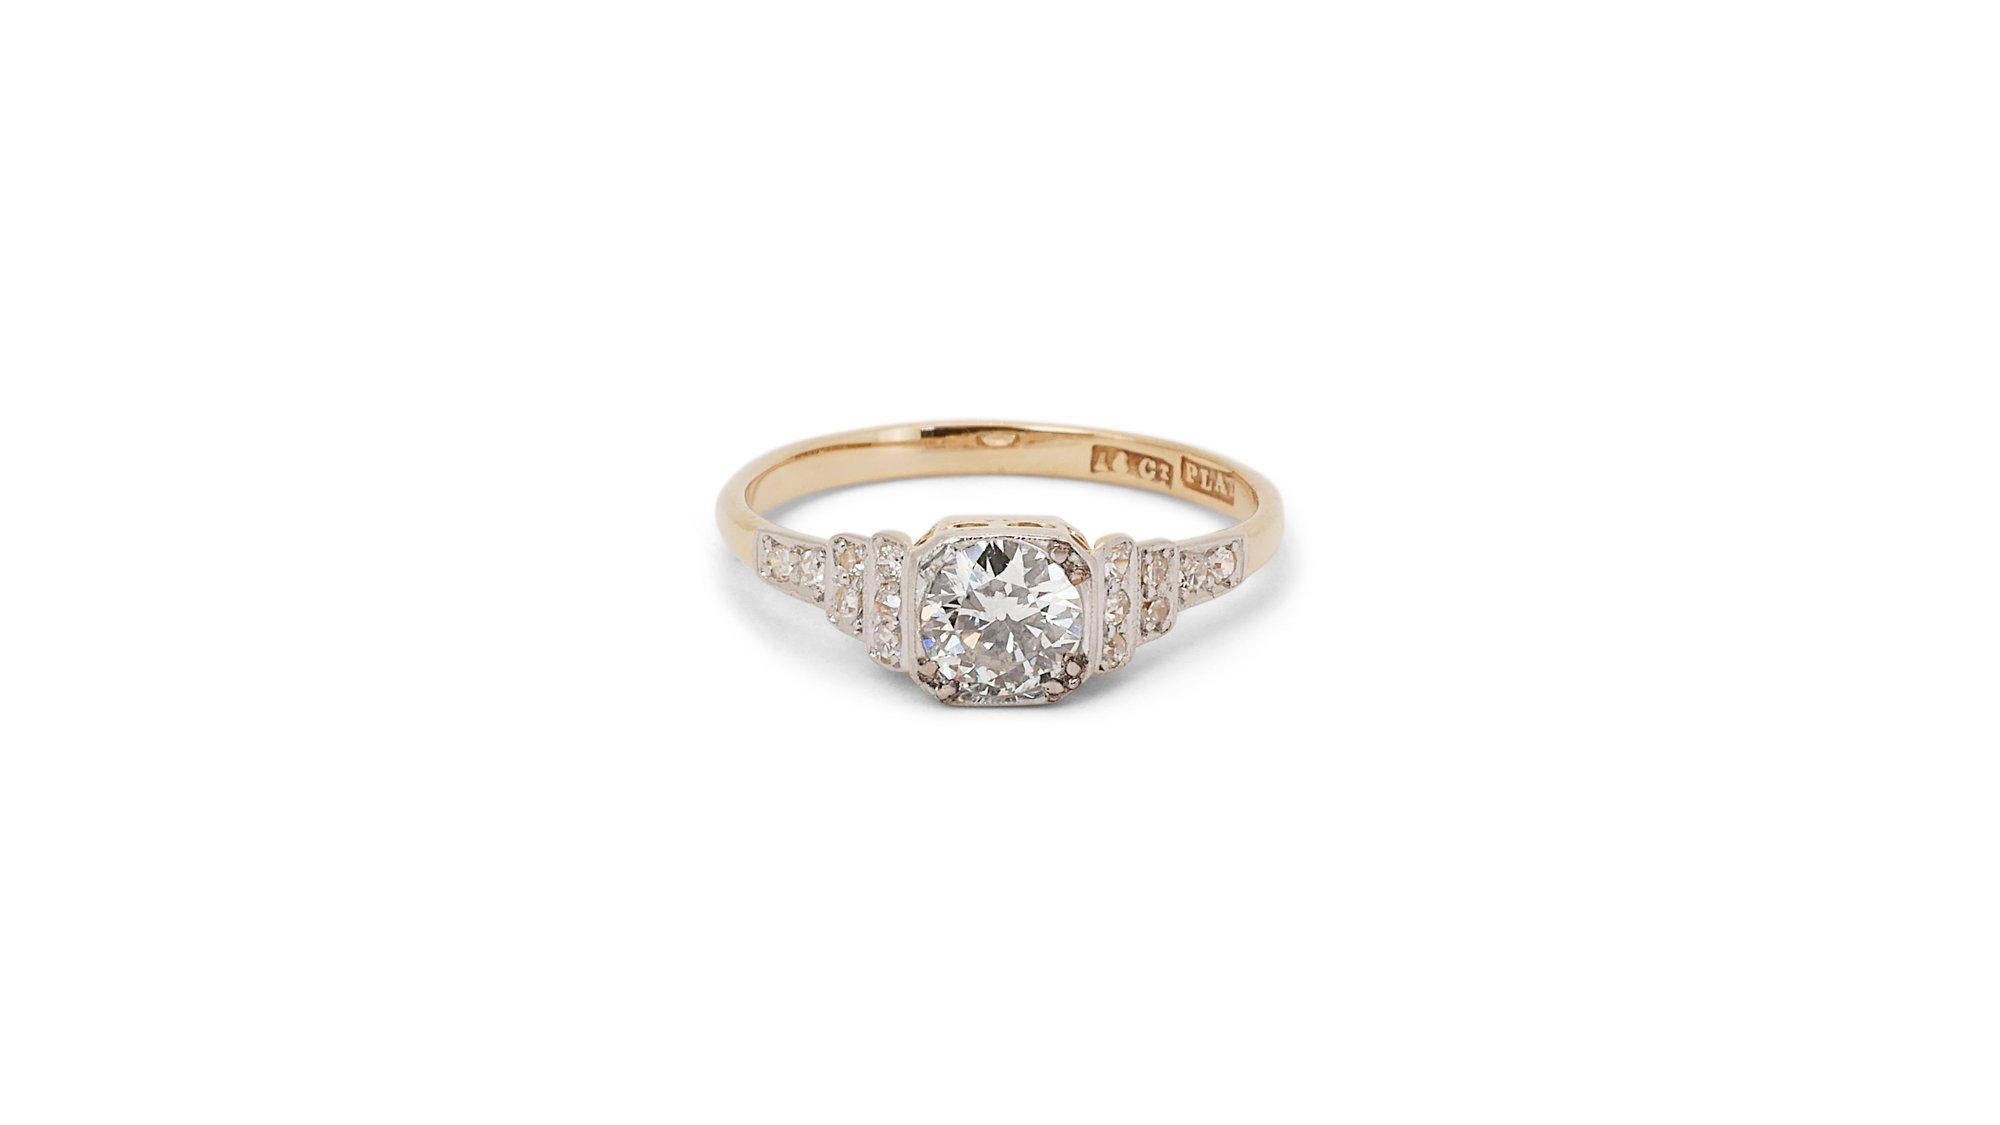 A beautiful vintage style Ring with a dazzling 0.6 carat European cut natural diamond. It has 0.15 carat of side diamonds which add more to its elegance. The jewelry is made of 18K White Gold with a high quality polish. It comes with an IGI